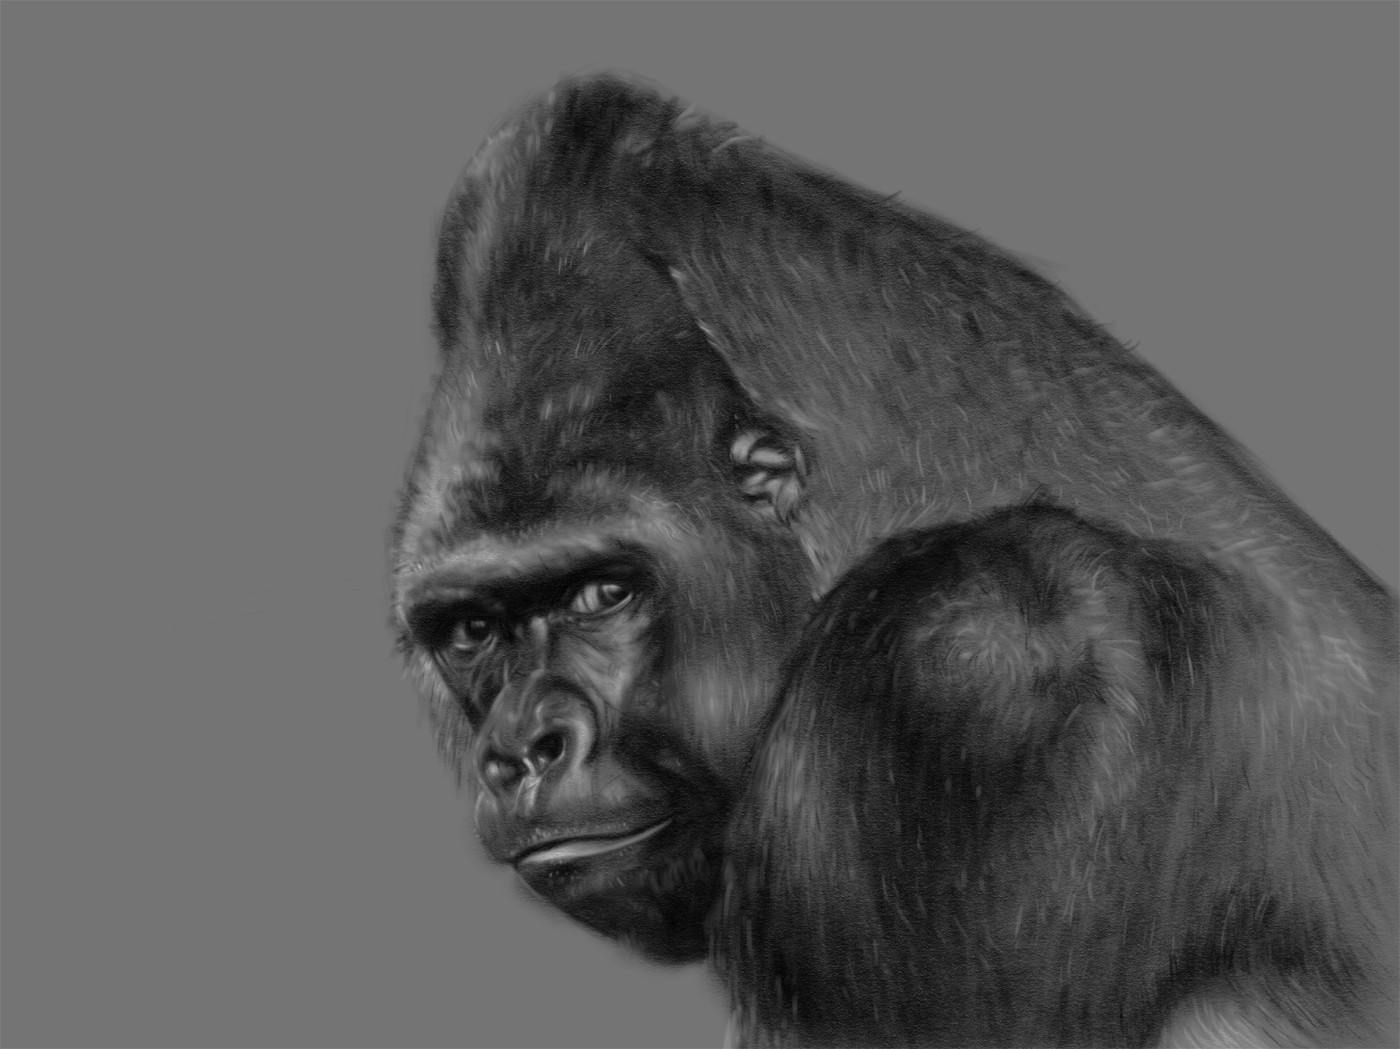 A digital drawing imitating graphite of a gorilla's bust turning to the left towards the viewer.